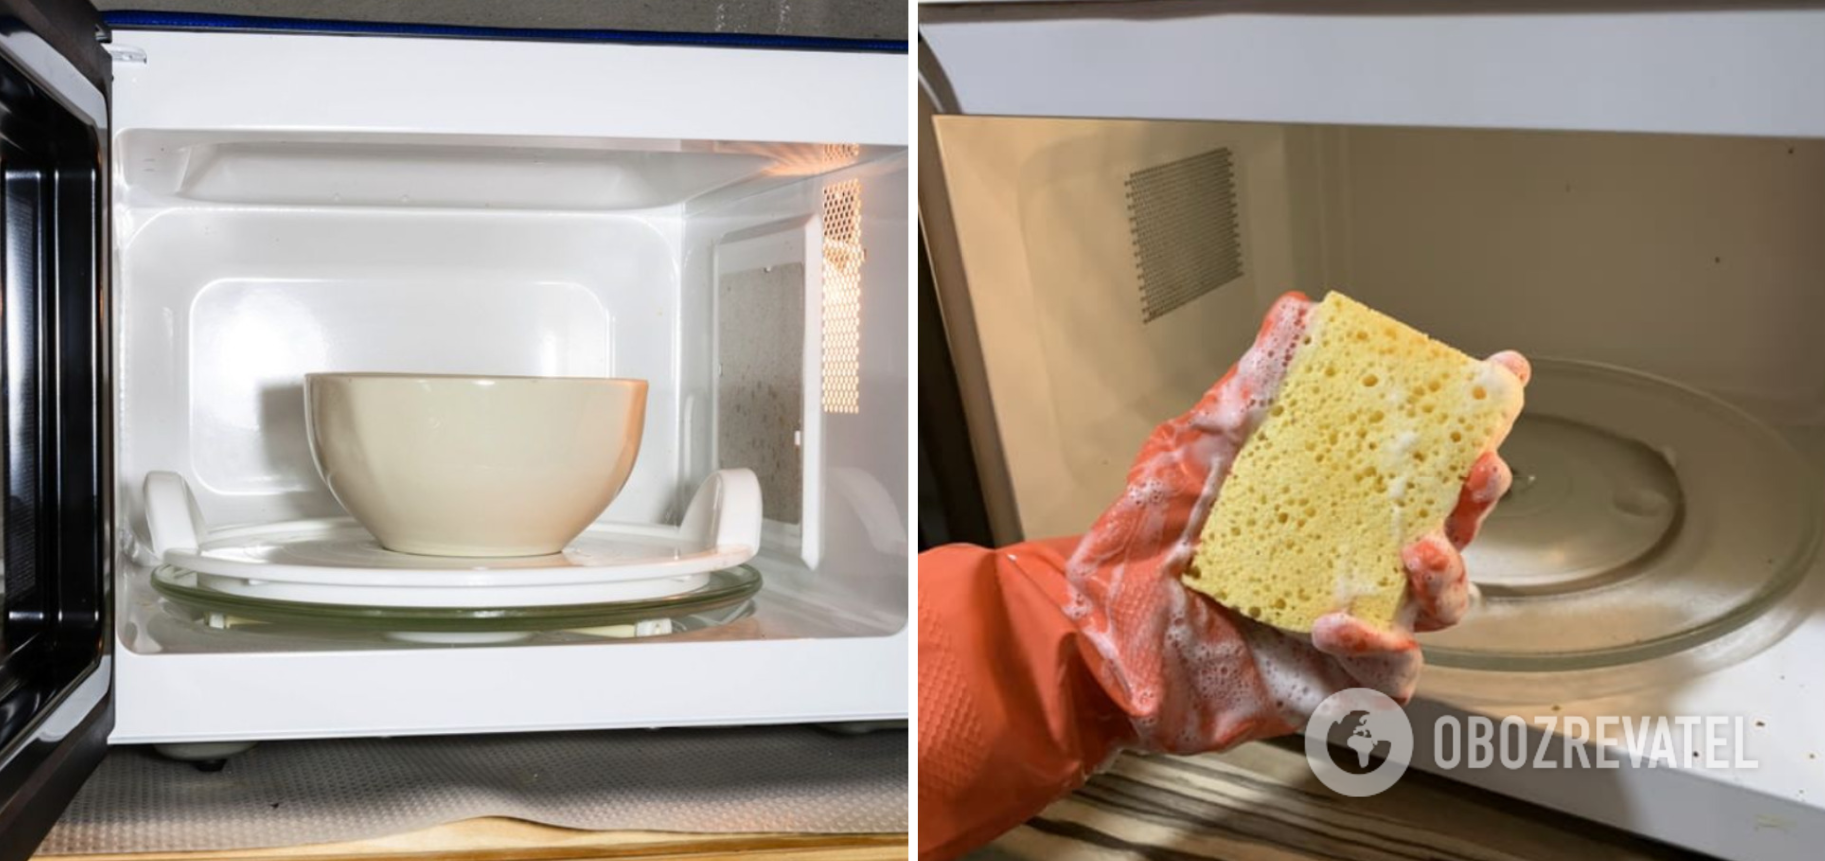 How to clean the microwave with vinegar